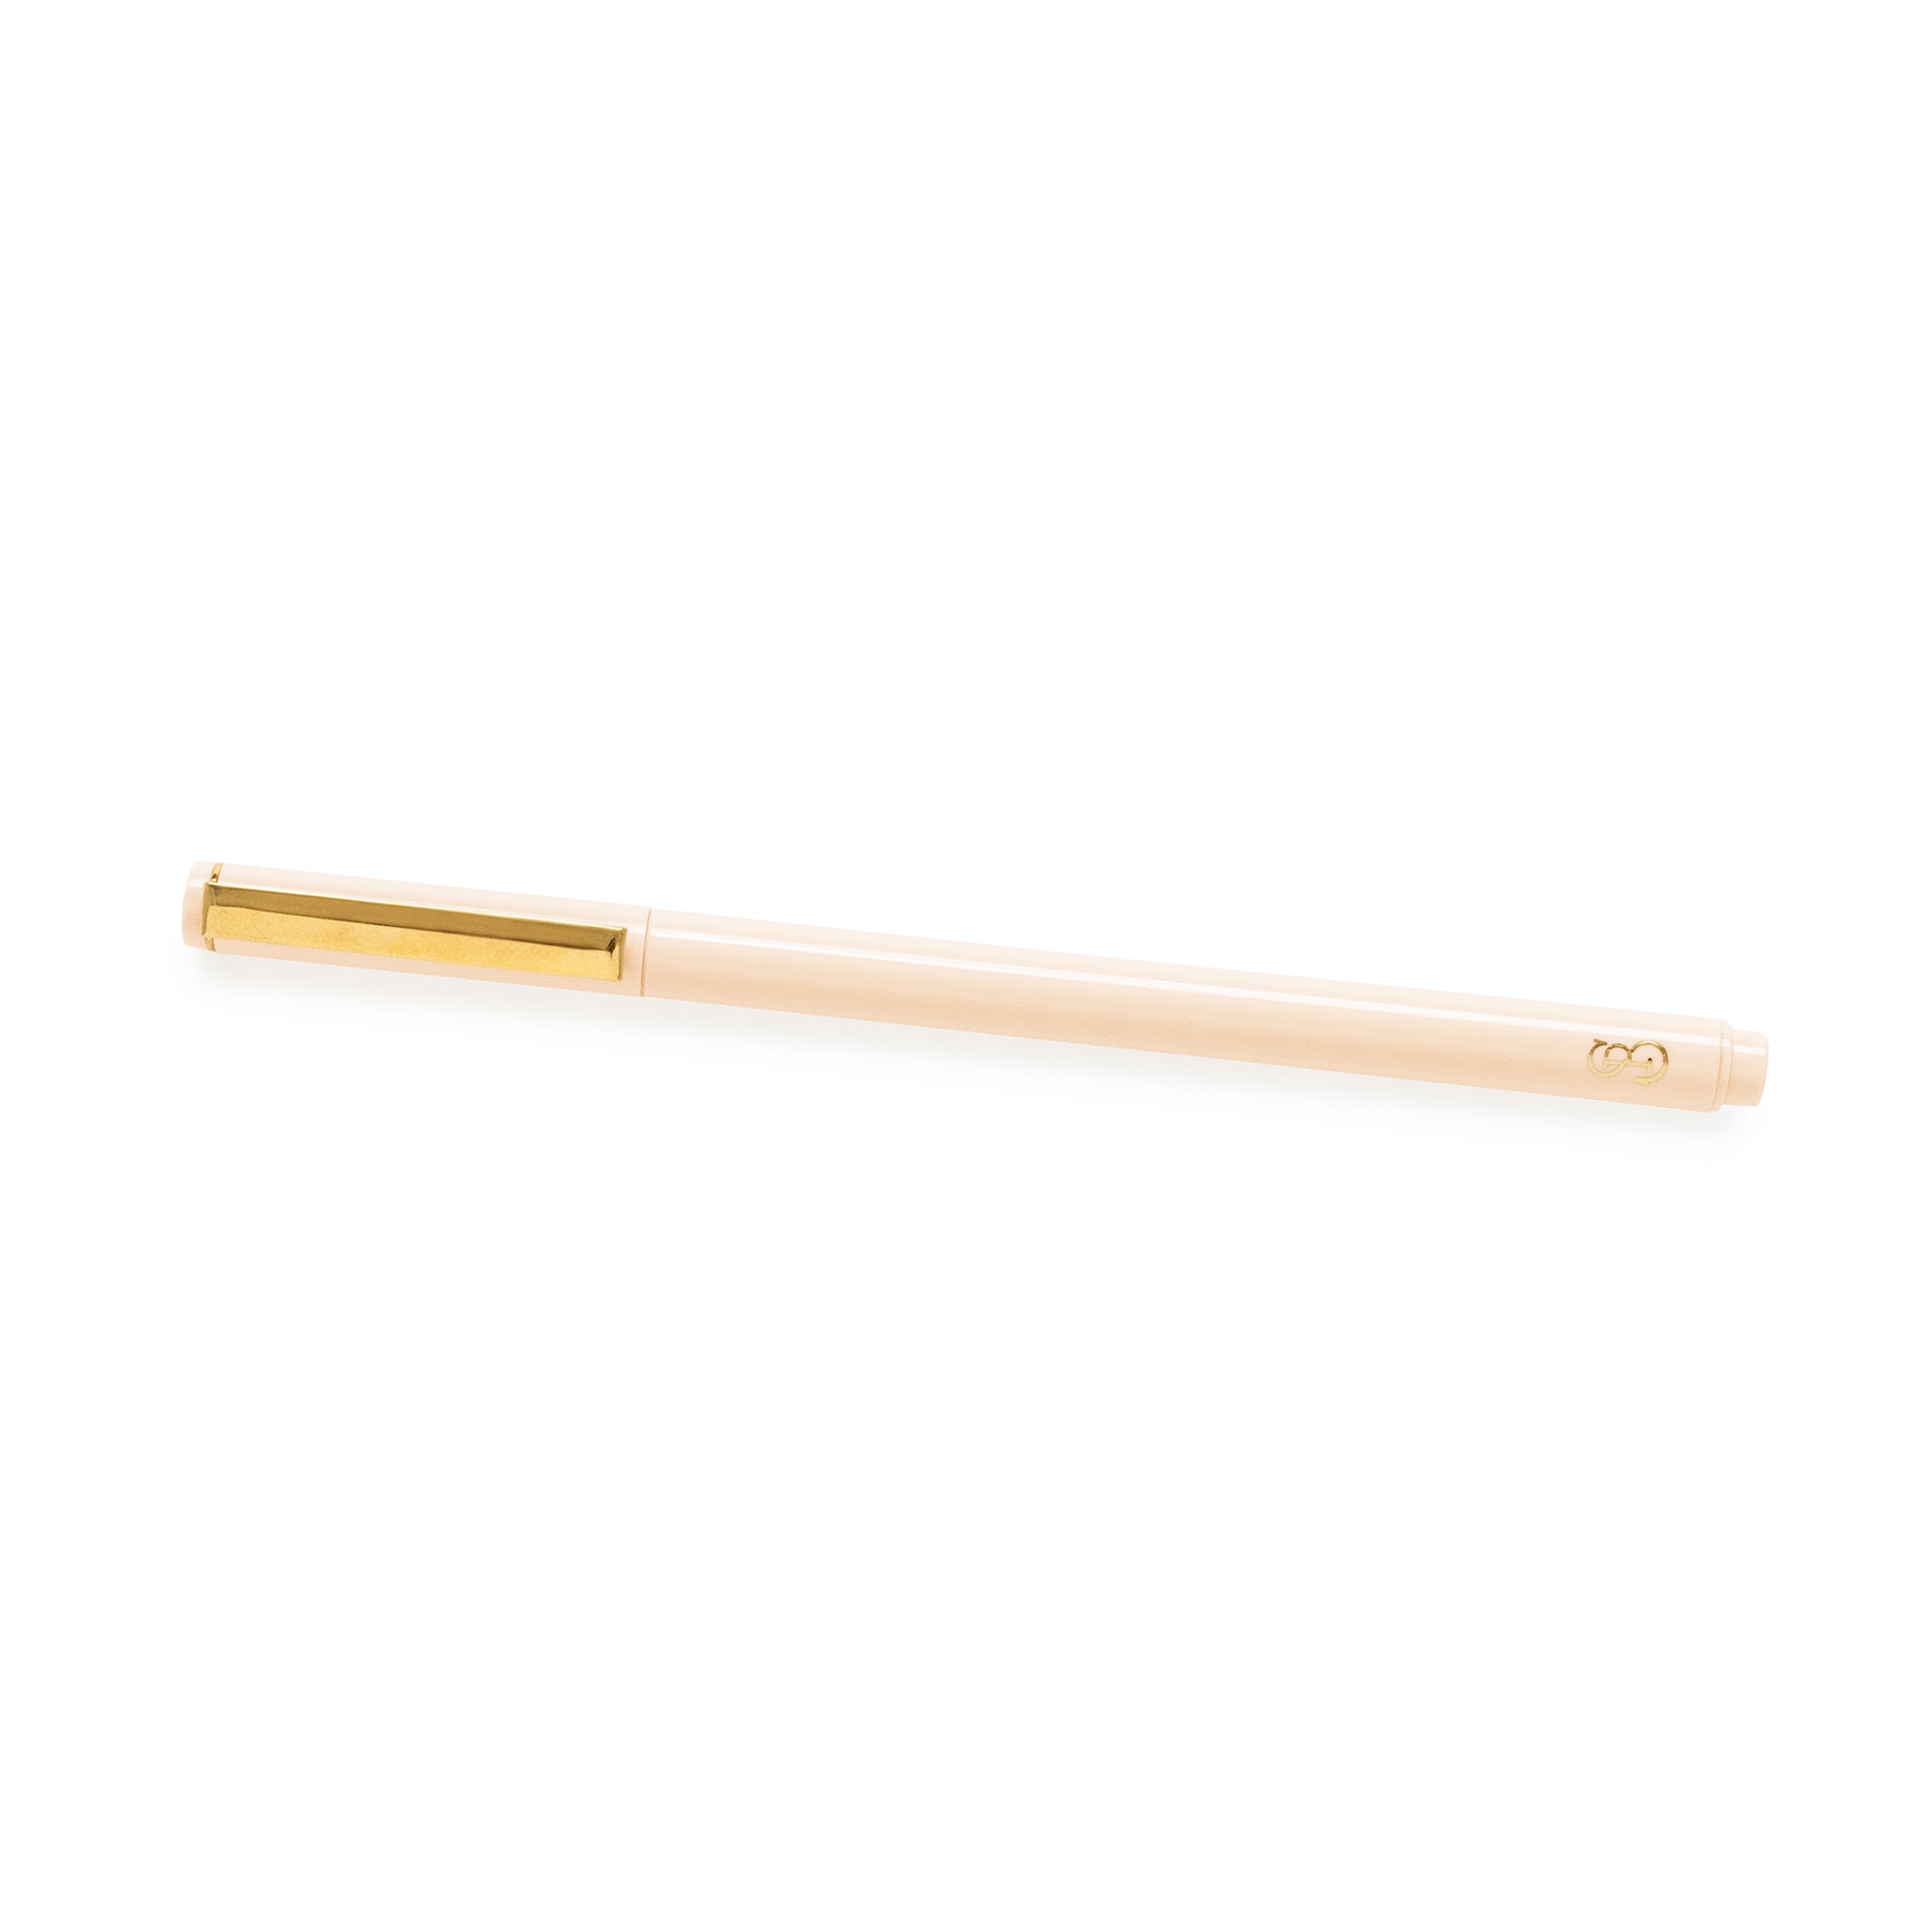 White Tip-Top Rollerball Pens with Gold Cap, Set of 2, Writing